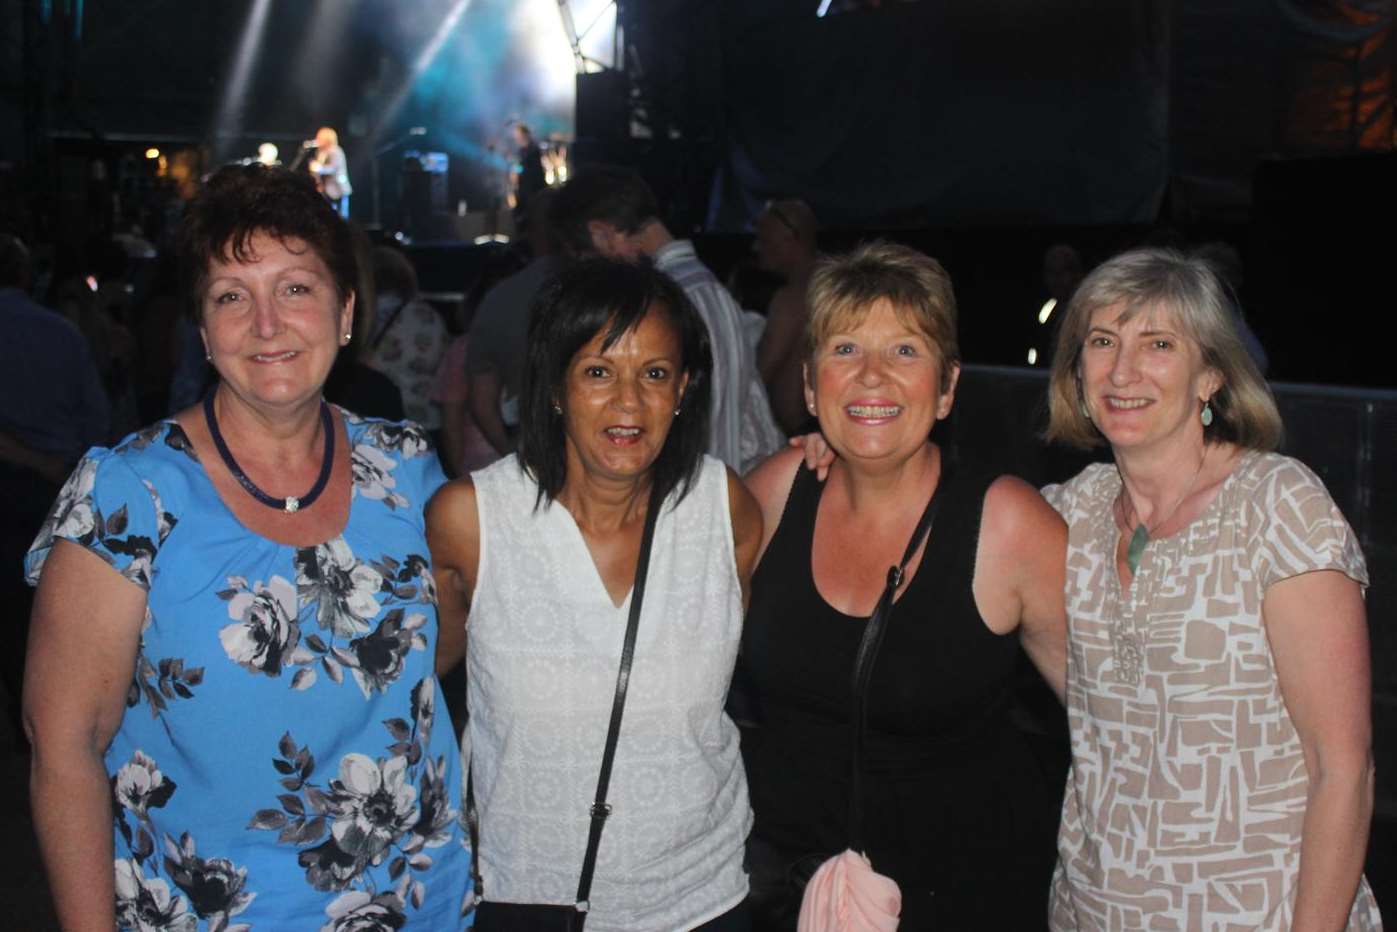 School friends Brenda Castle, Jackie Keep, Sue Franks and Yvonne Collins haven't seen each other in 40 years and were reunited at Level 42. Photo: Adam Elsden.